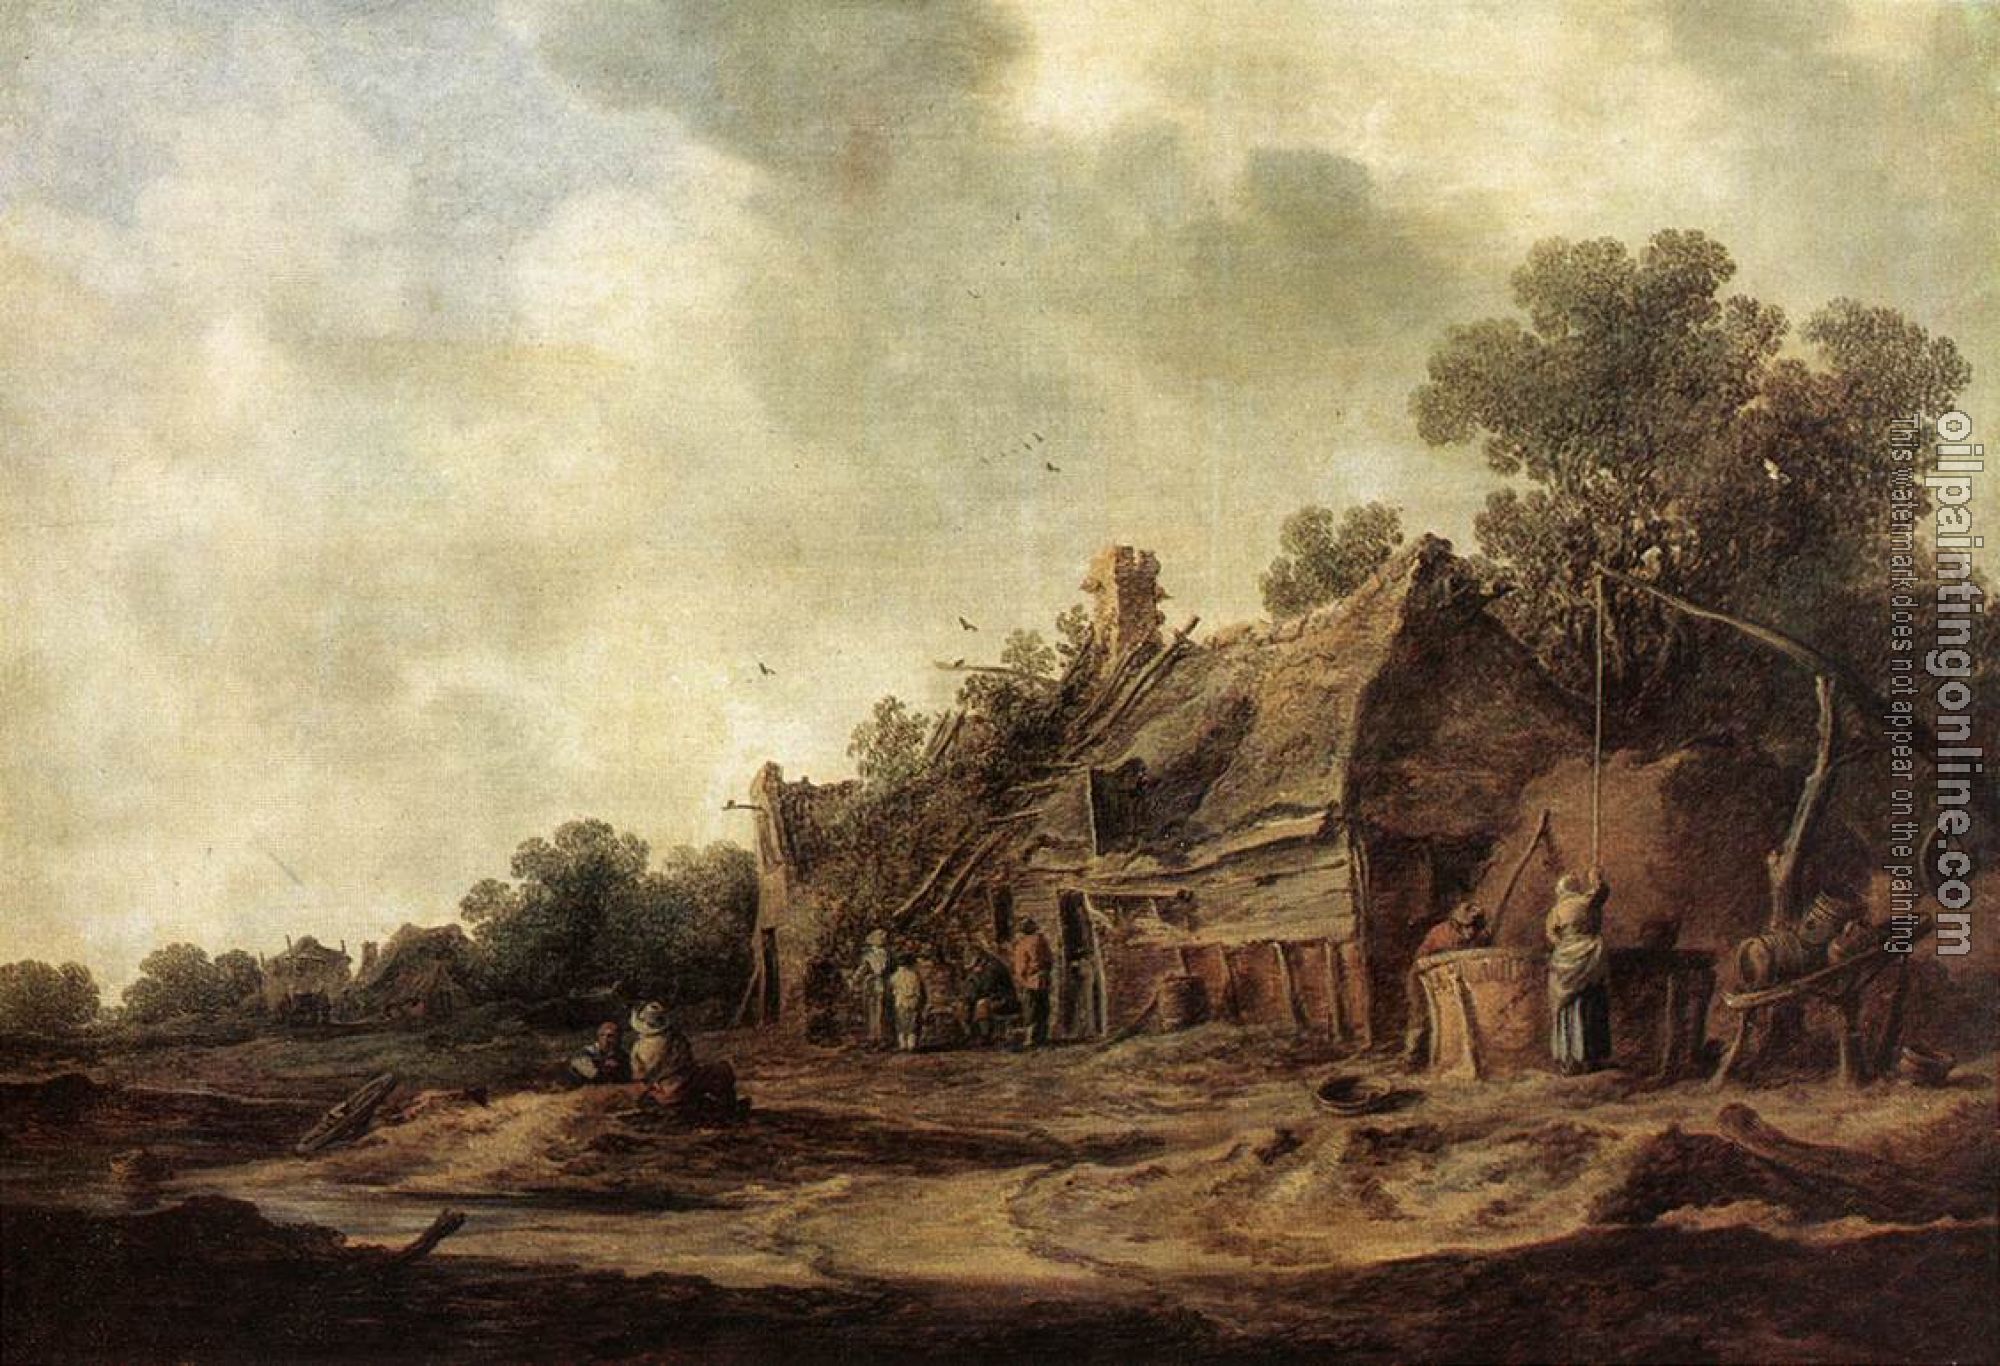 Goyen, Jan van - Peasant Huts with a Sweep Well